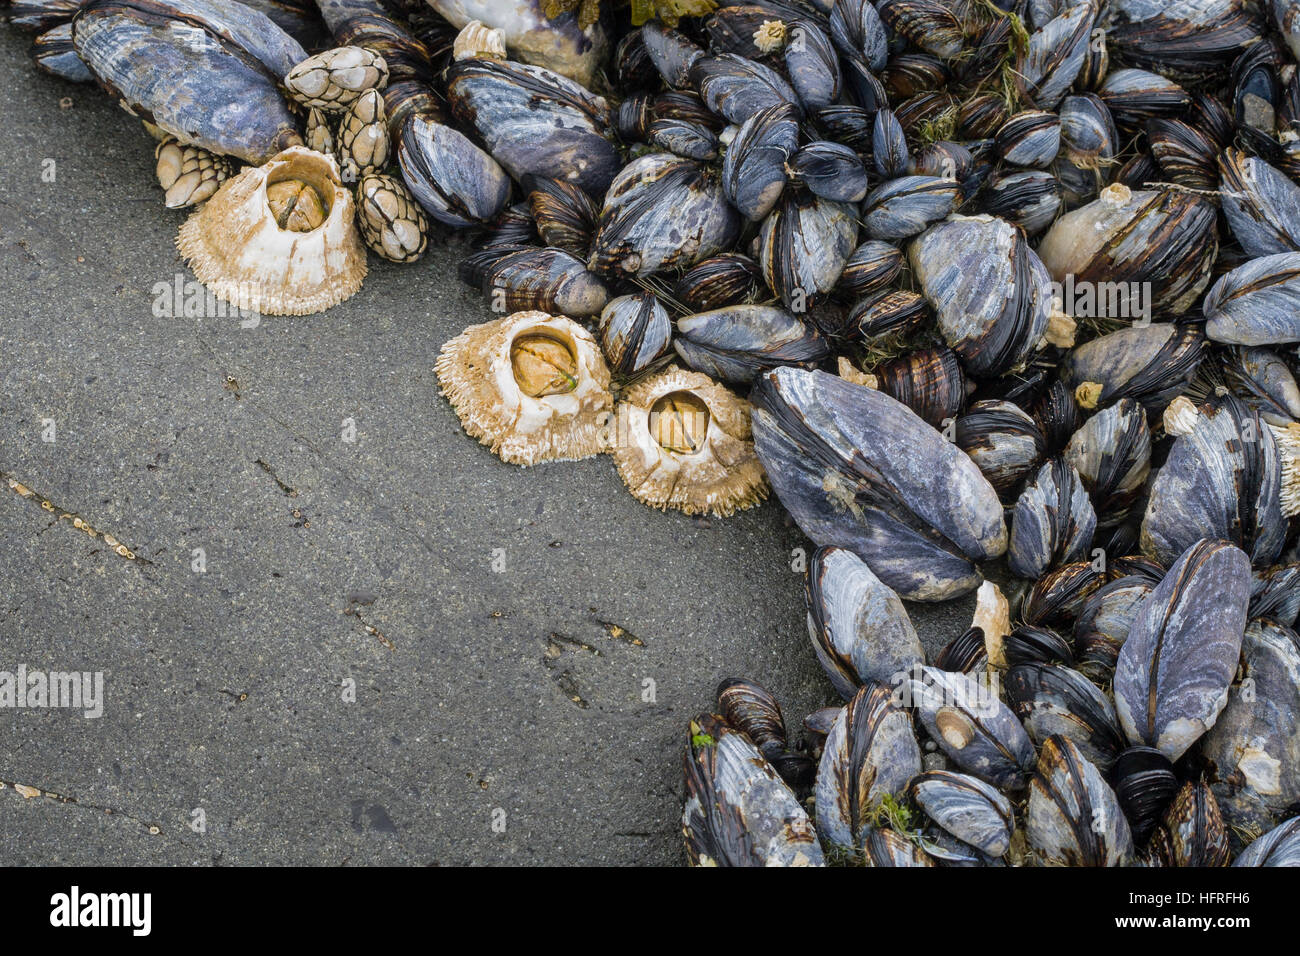 Mussels and barnacles adhering to a rock. Stock Photo